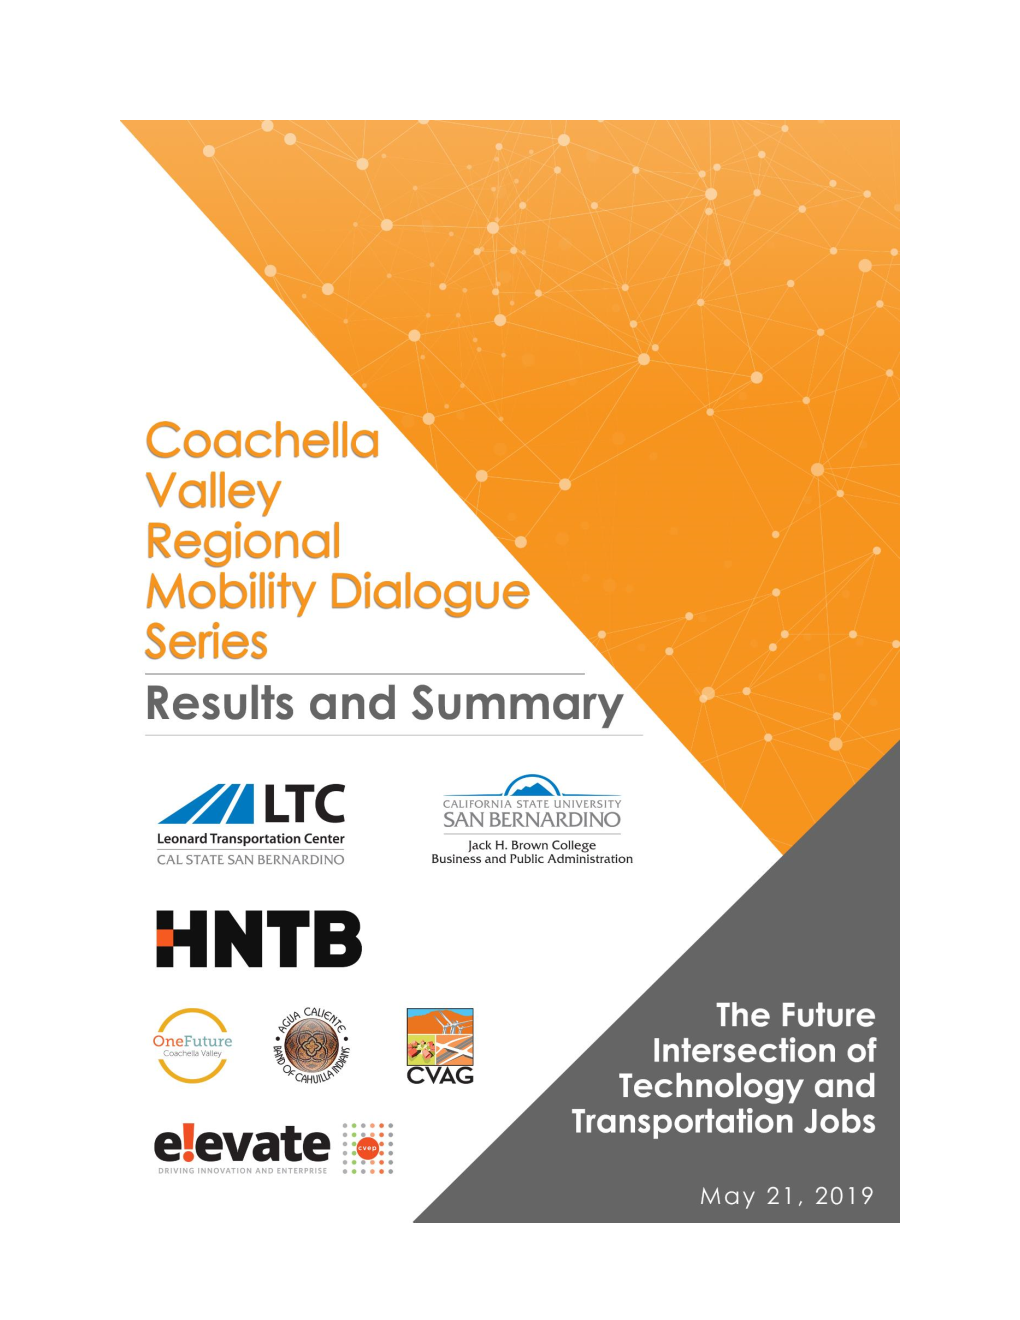 Transportation Planning and Smart Cities: the Next Steps for the Coachella Valley